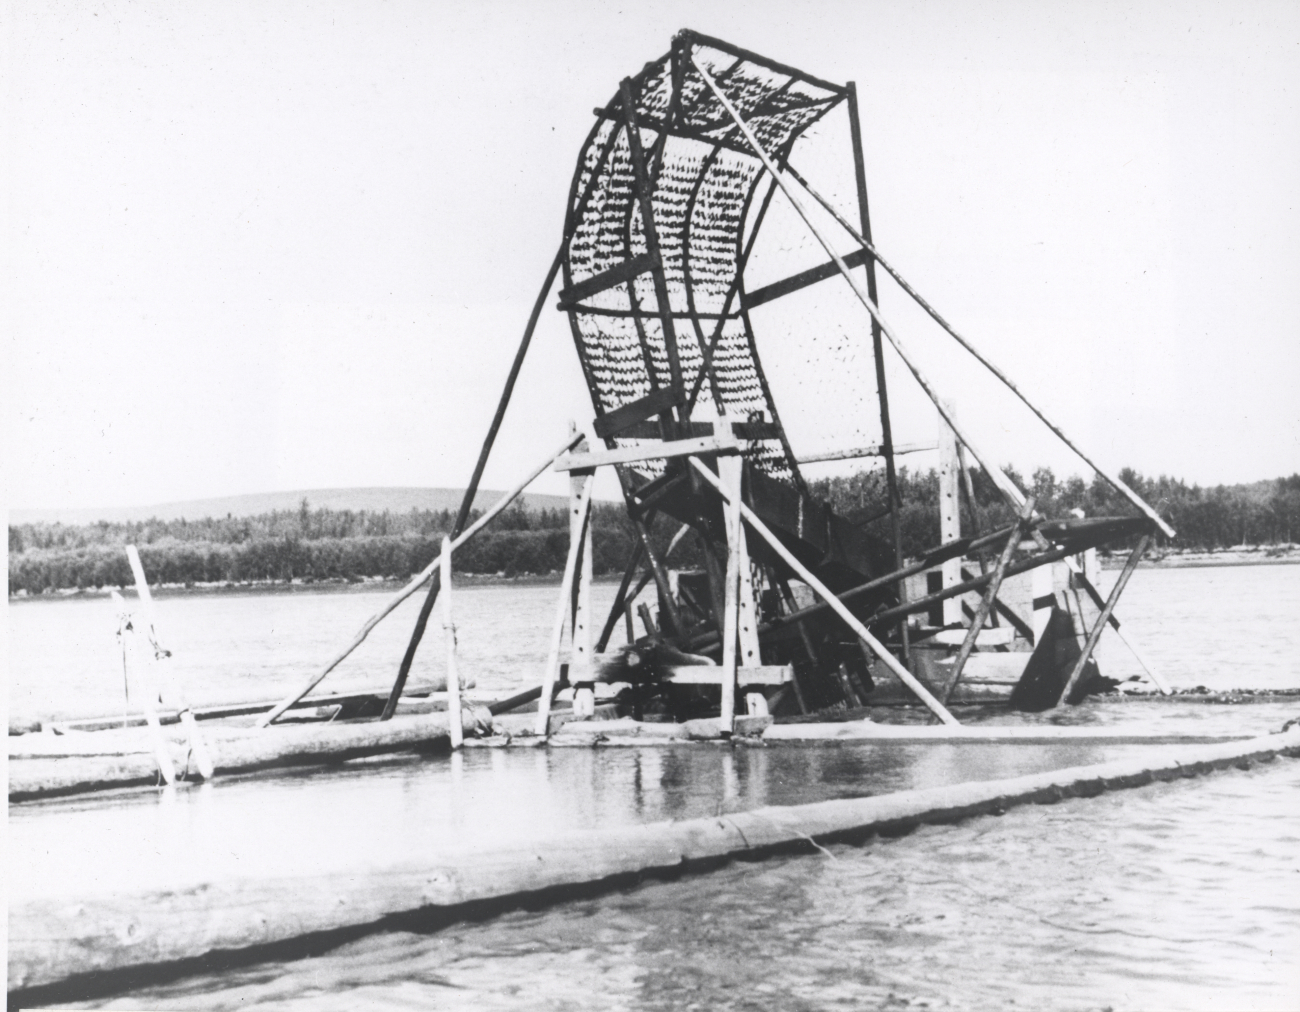 Fishwheels are still a successful method for natives to obtain salmon from many rivers in Alaska for subsistence and dogfood